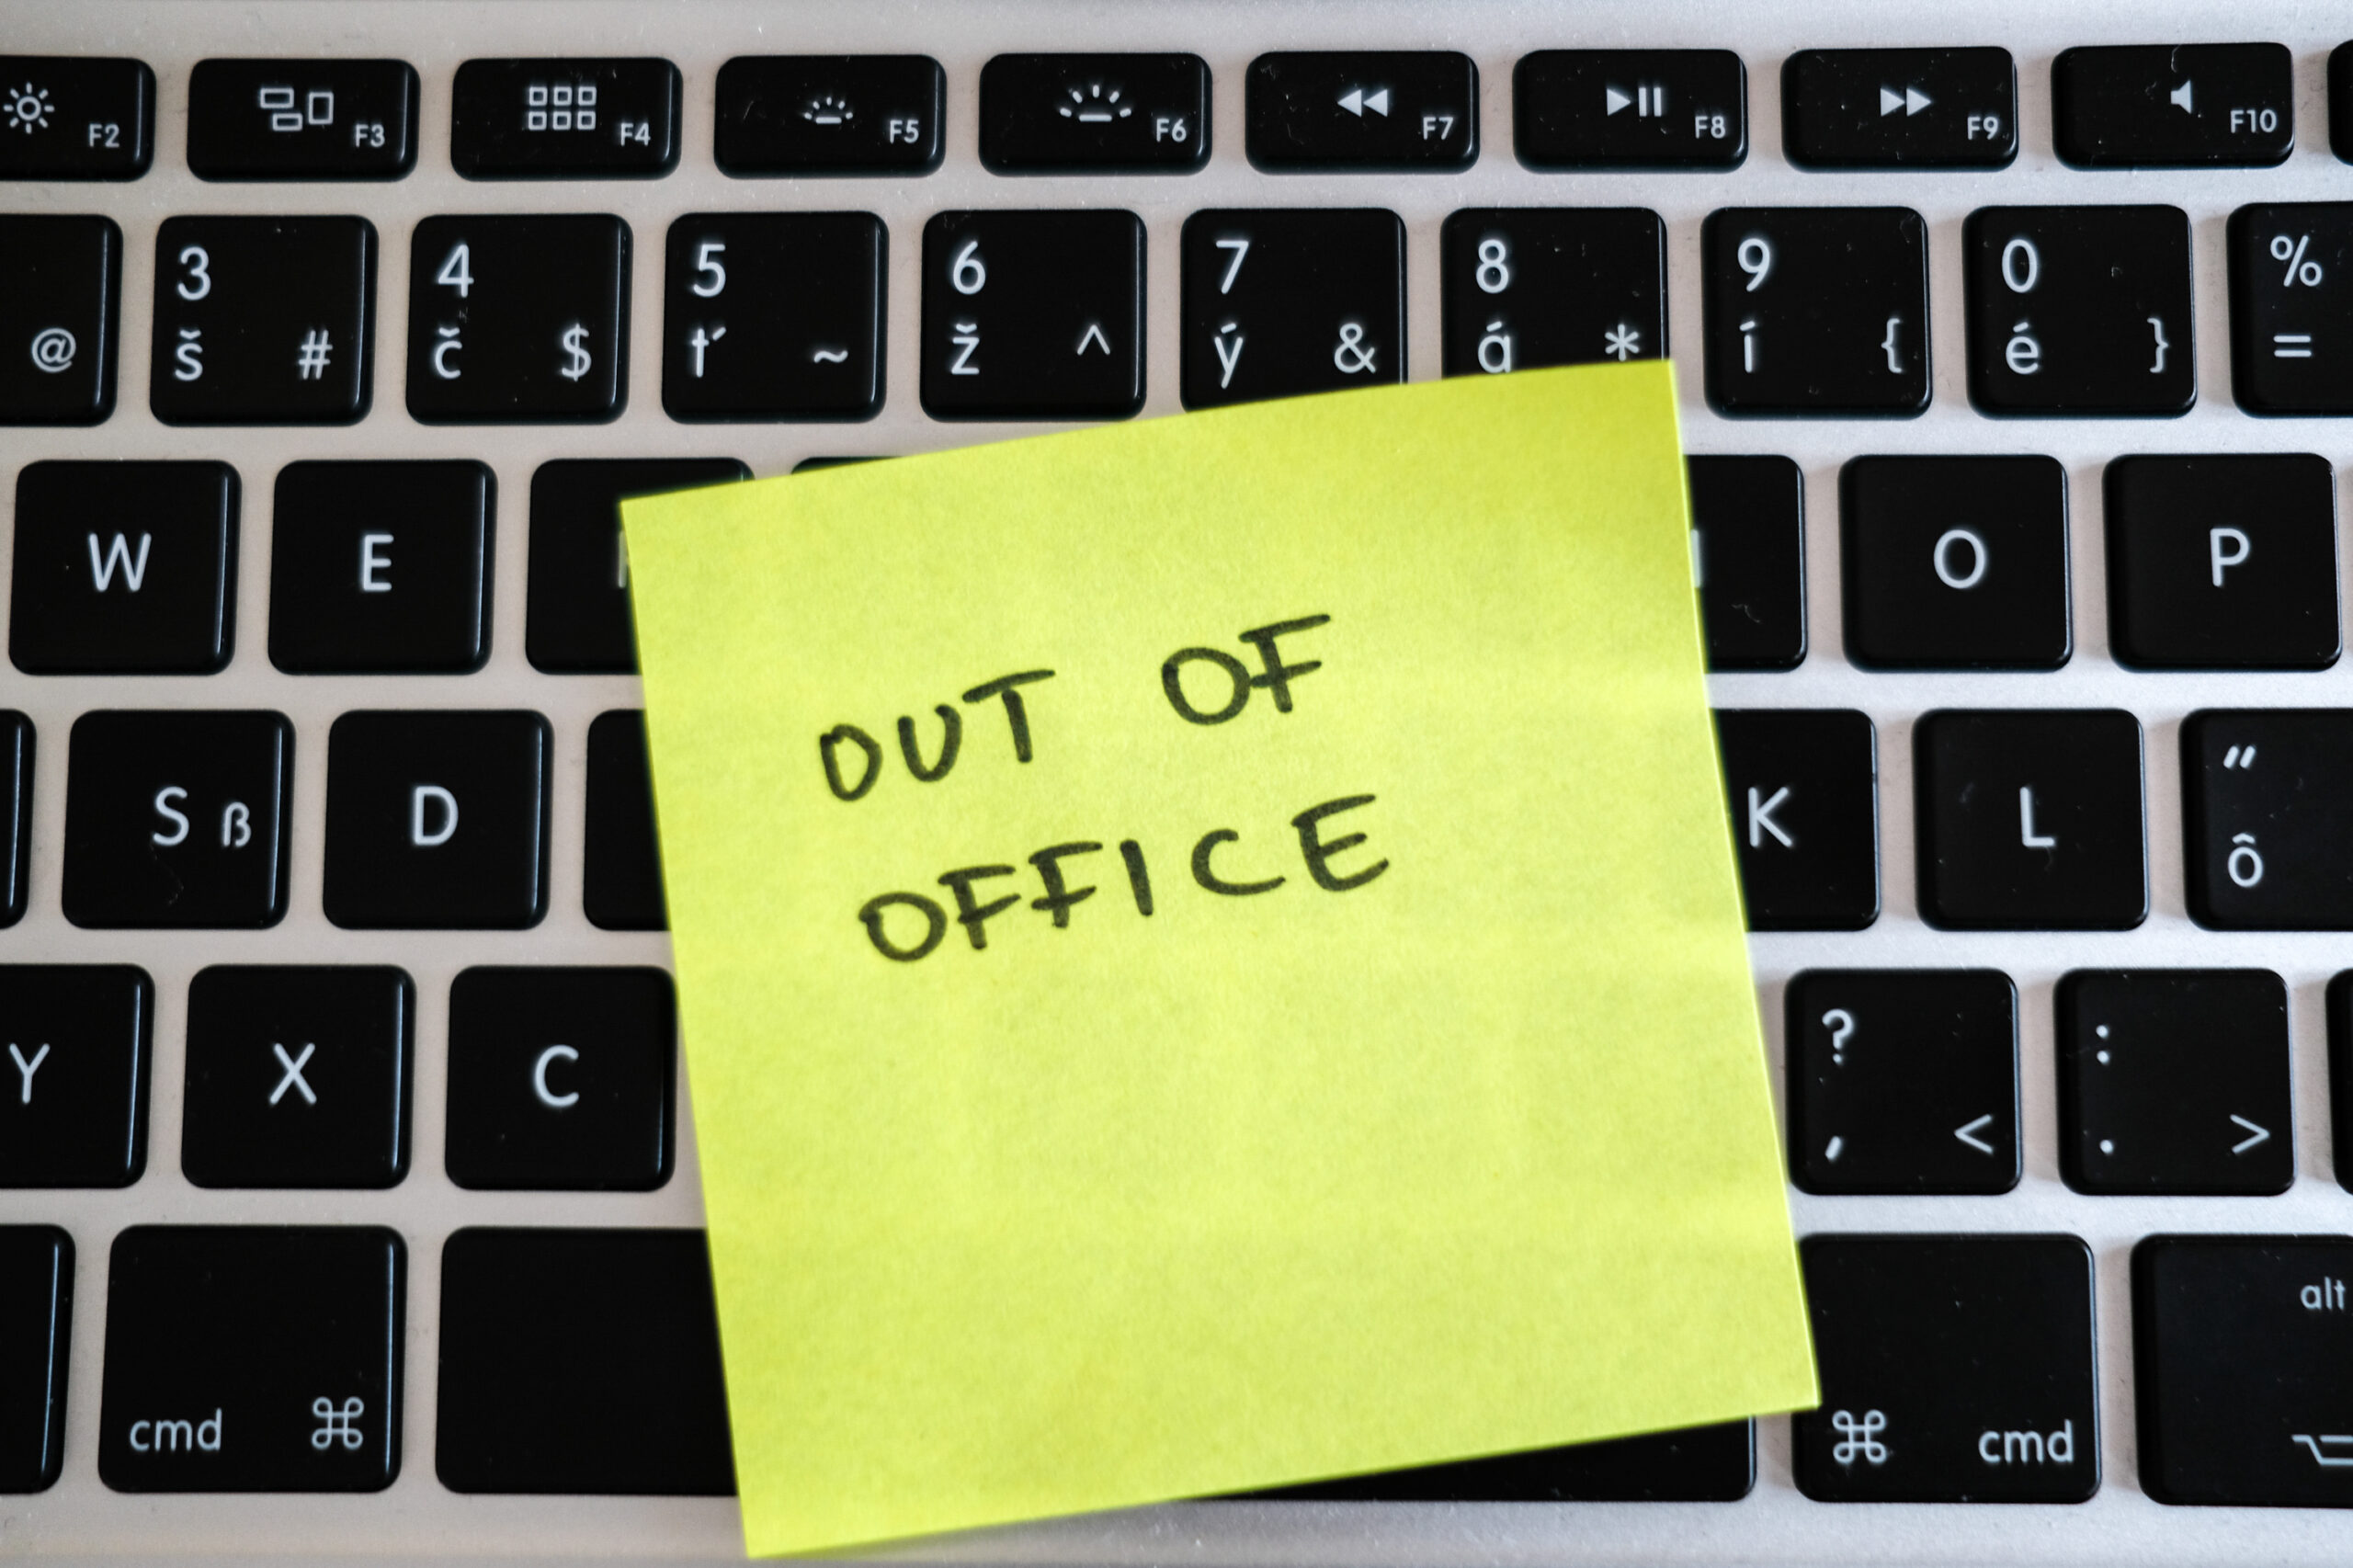 Vacation needed. Holiday office message on laptop. Out of office.